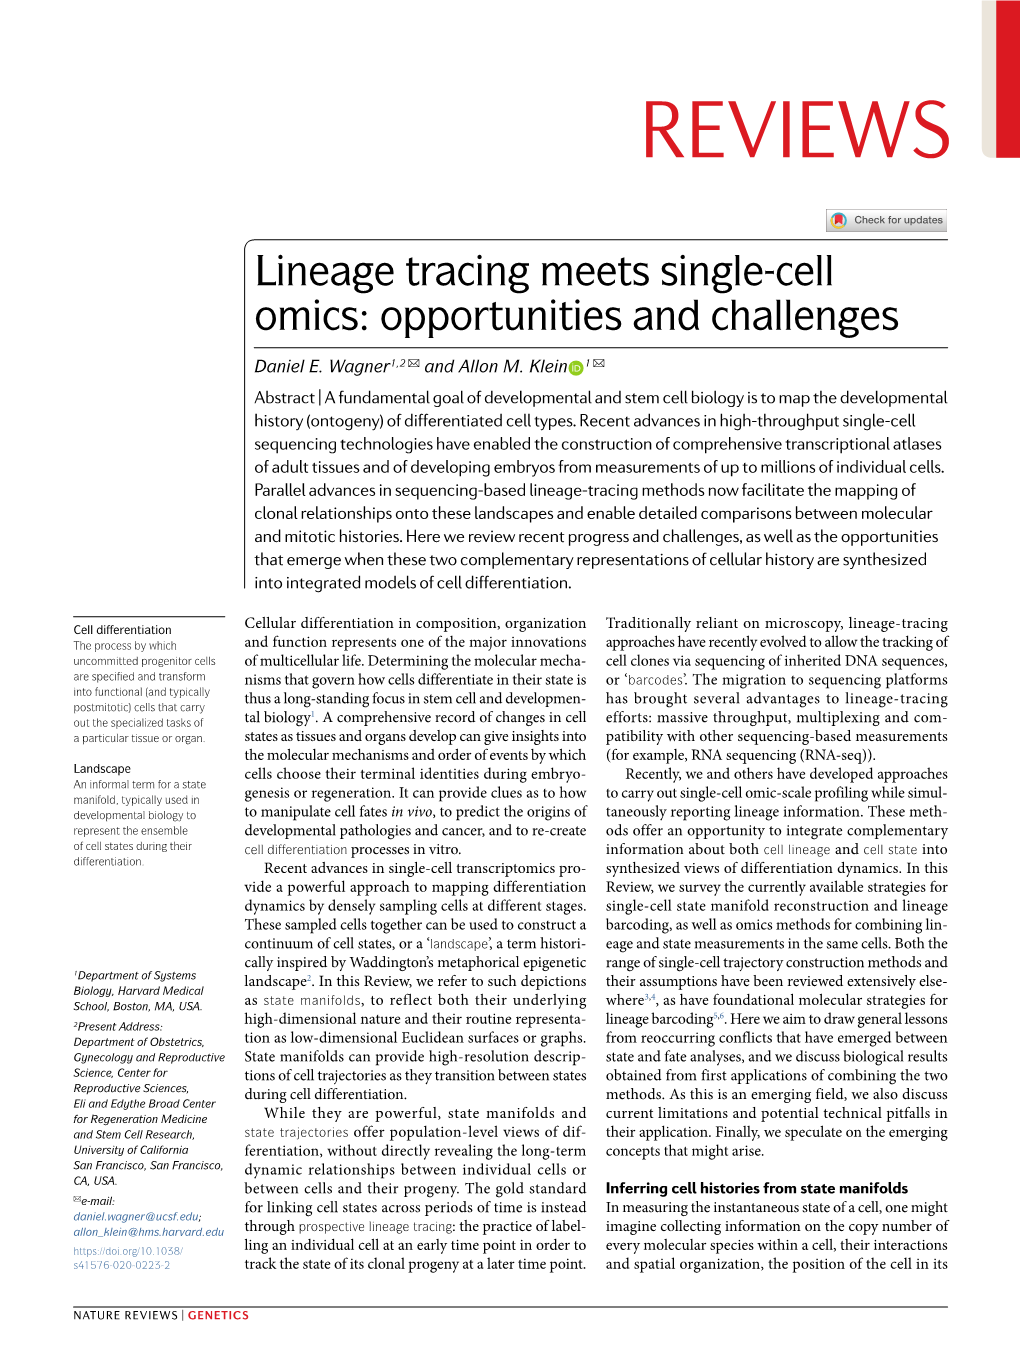 Lineage Tracing Meets Single-Cell Omics: Opportunities and Challenges